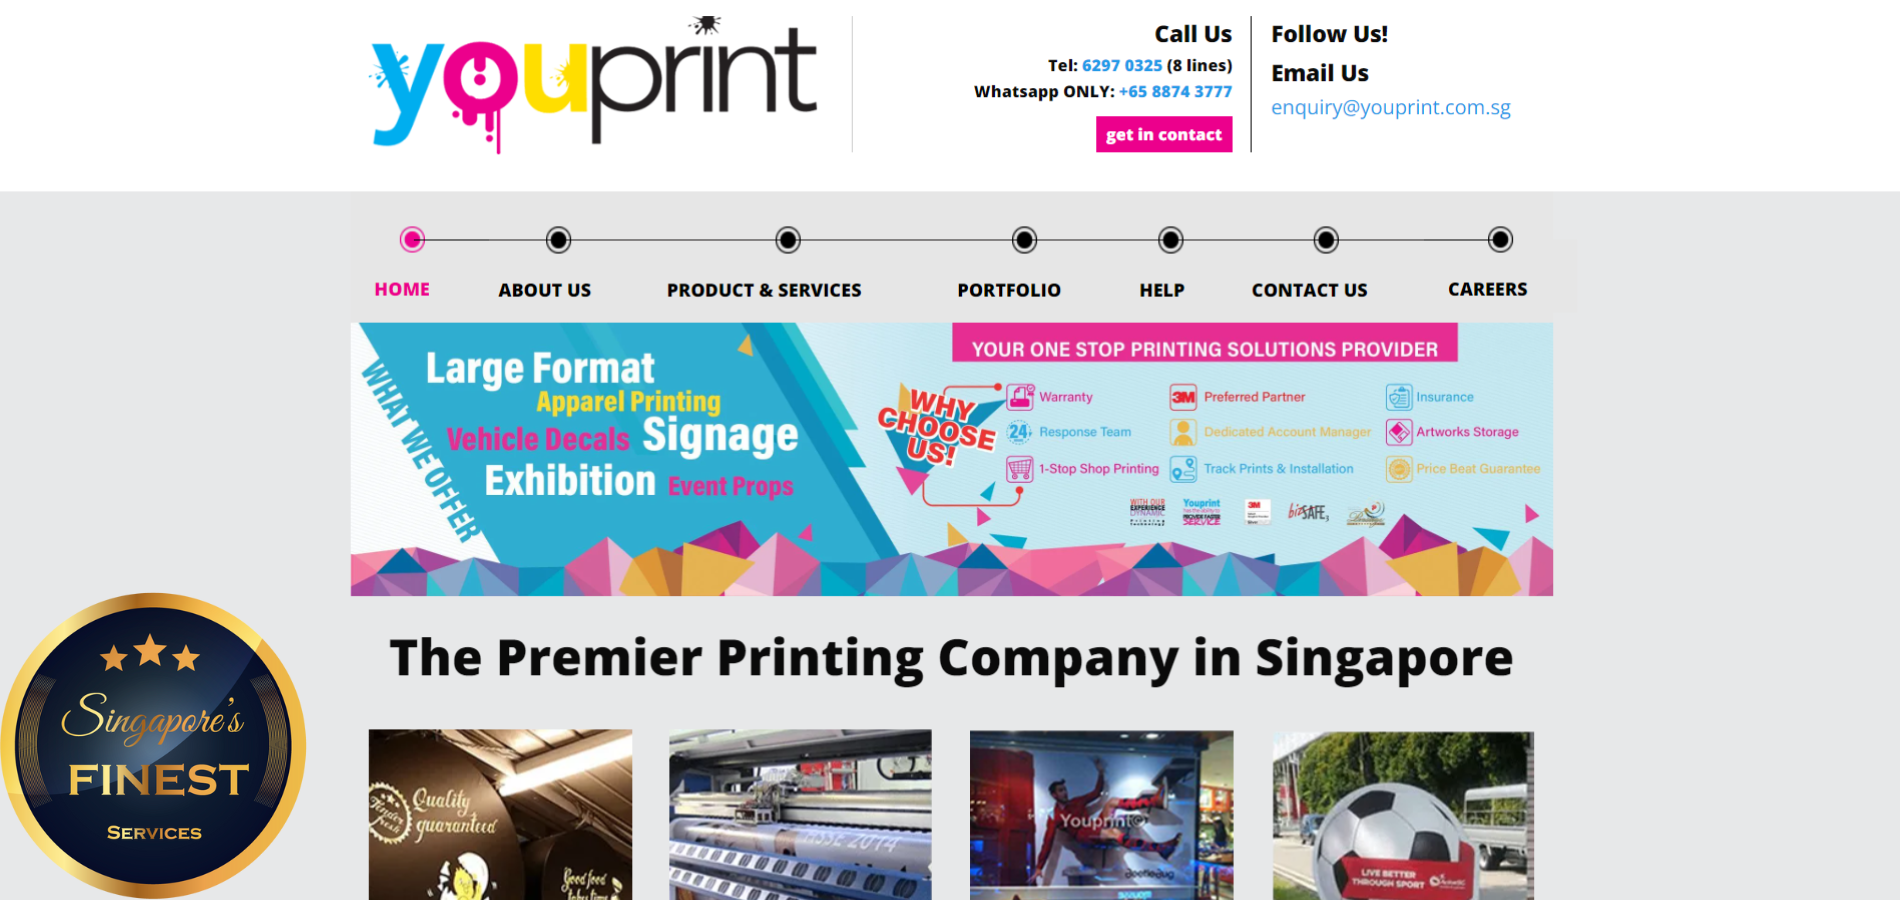 The Finest Printing Services in Singapore